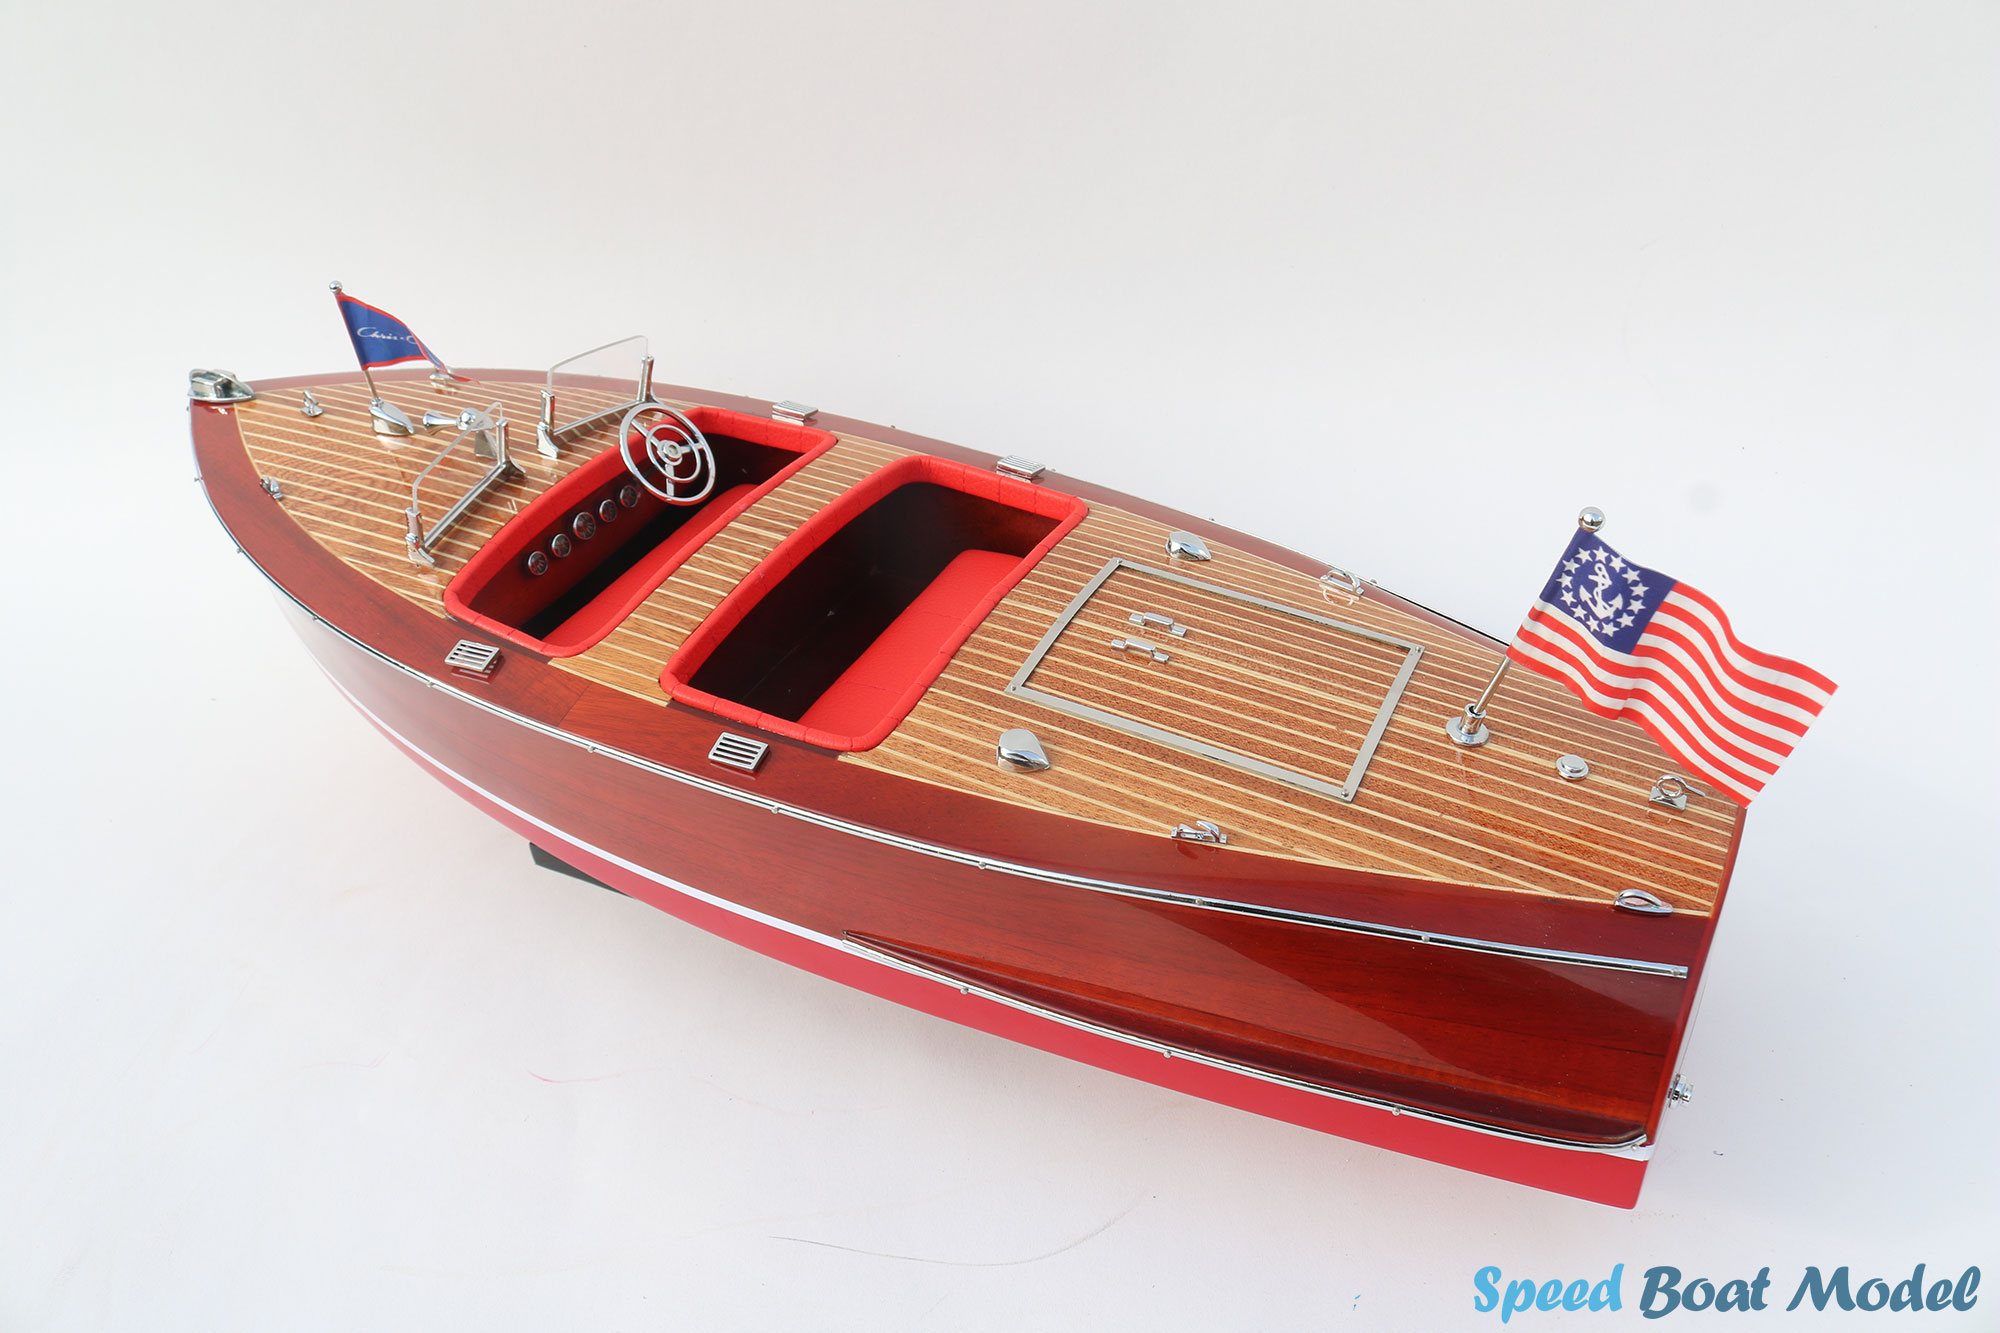 Chris Craft Deluxe Runabout 1942 Speed Boat Model 33.4"